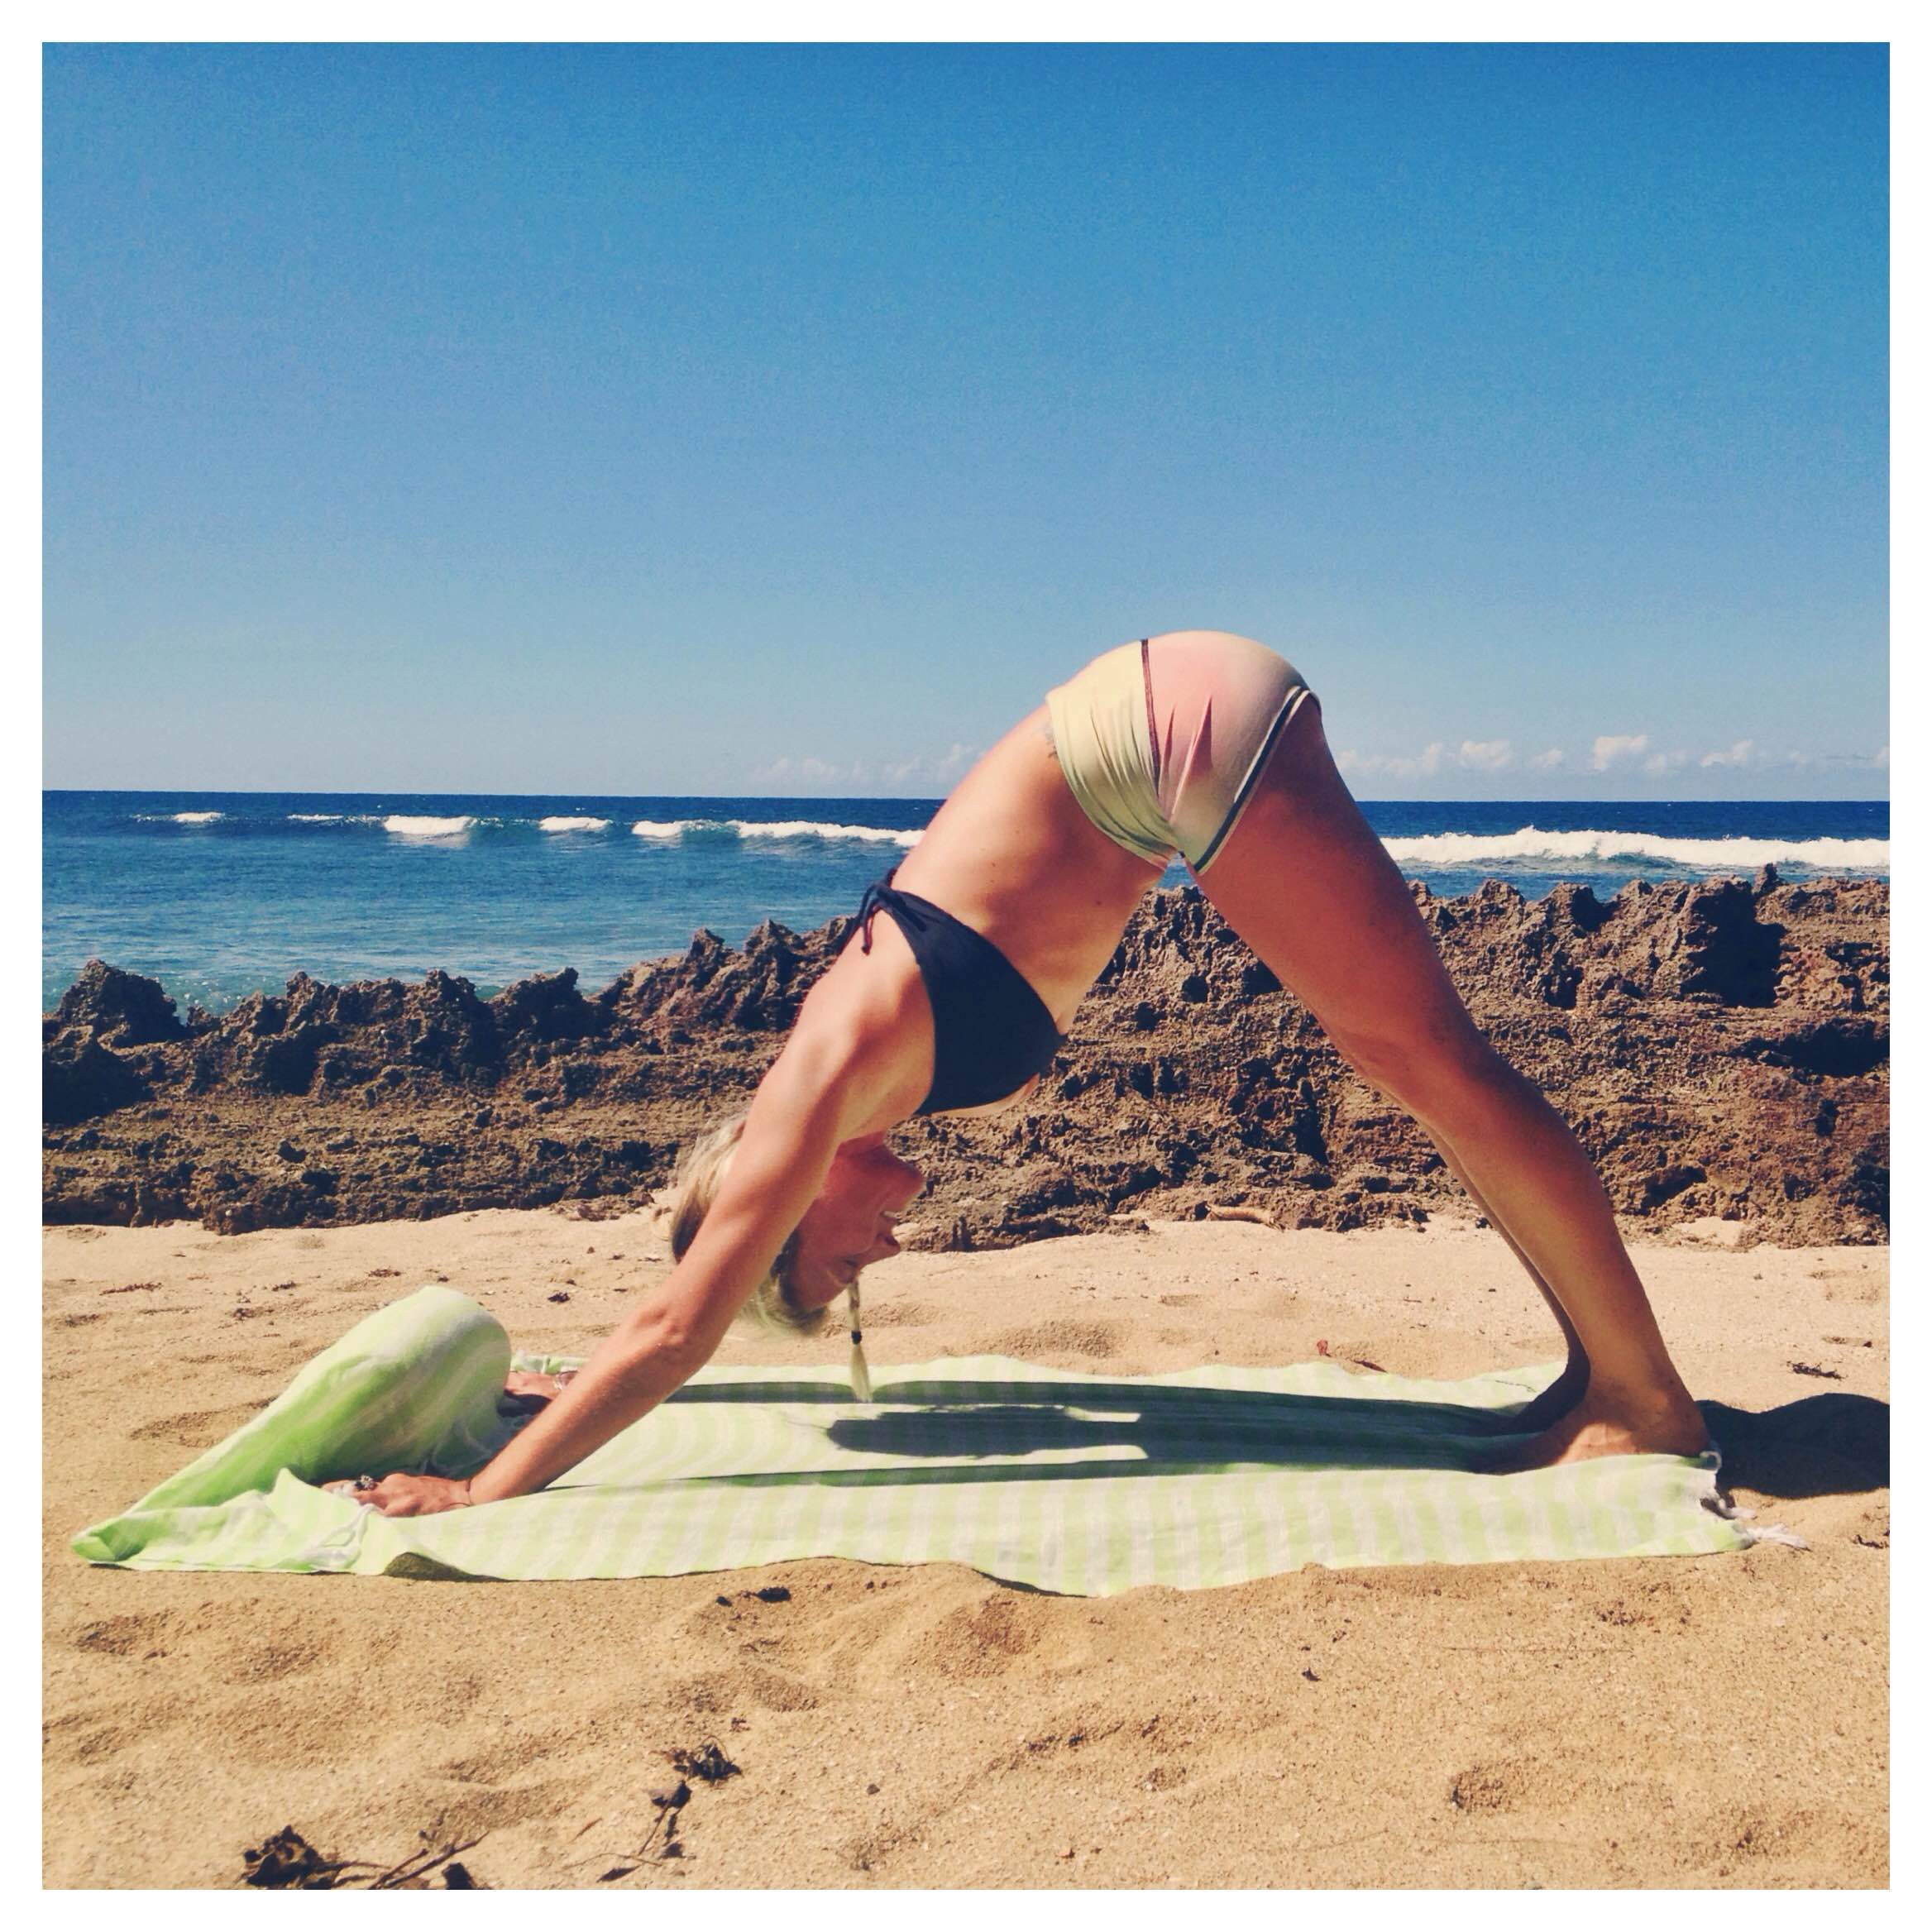 5 Beginner Yoga Poses For The Everyday Learner Help You Breathe, Meditate,  And Balance